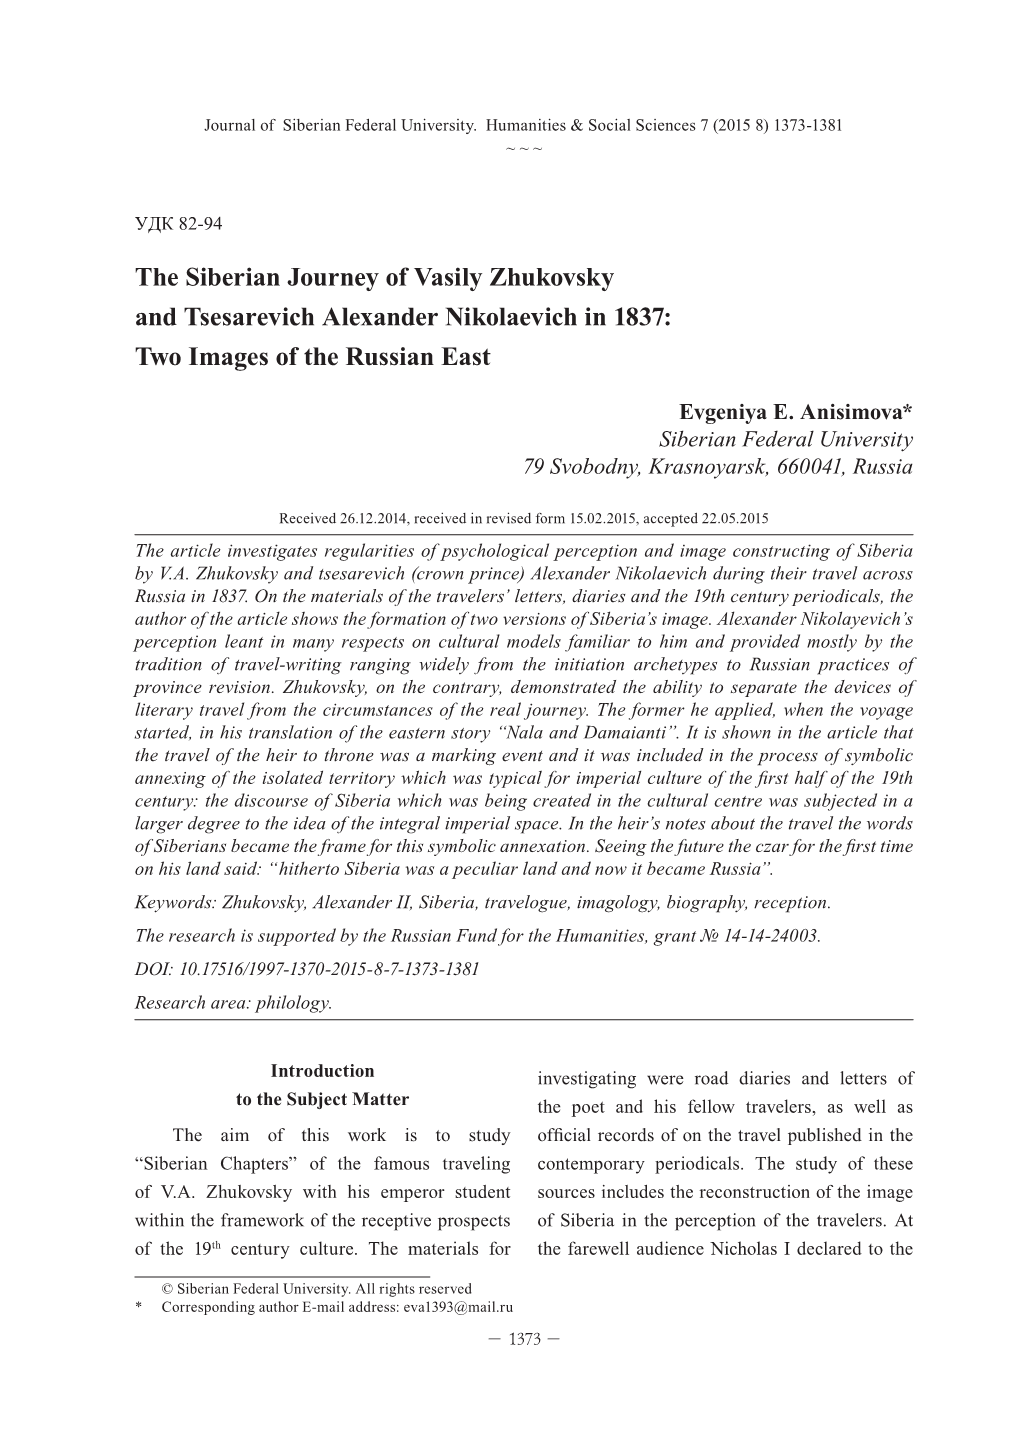 The Siberian Journey of Vasily Zhukovsky and Tsesarevich Alexander Nikolaevich in 1837: Two Images of the Russian East